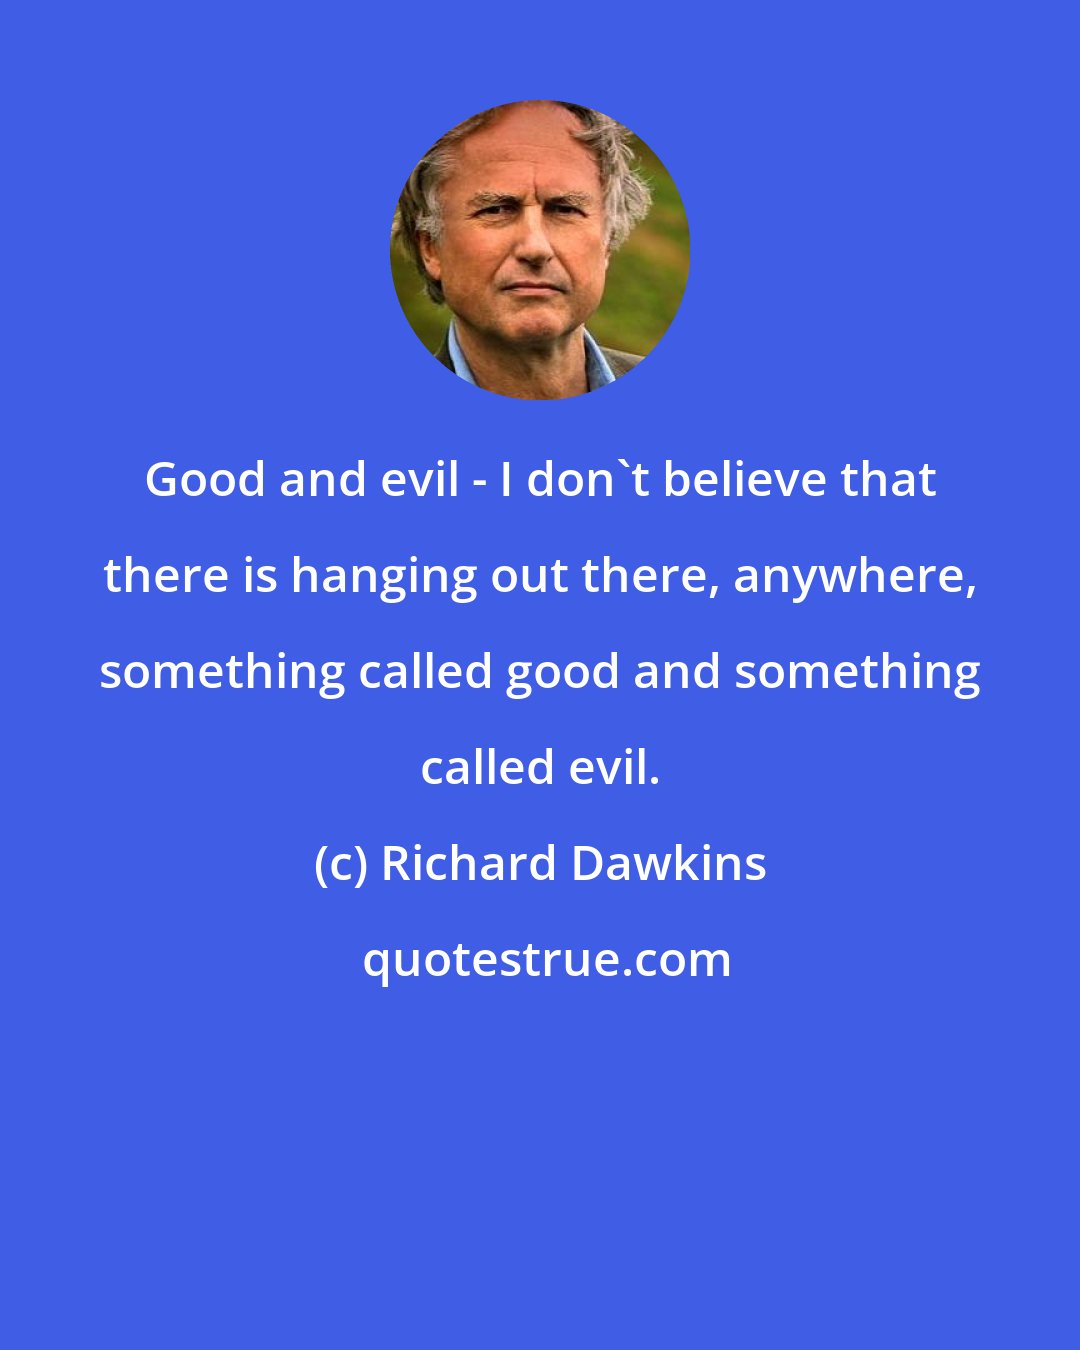 Richard Dawkins: Good and evil - I don't believe that there is hanging out there, anywhere, something called good and something called evil.